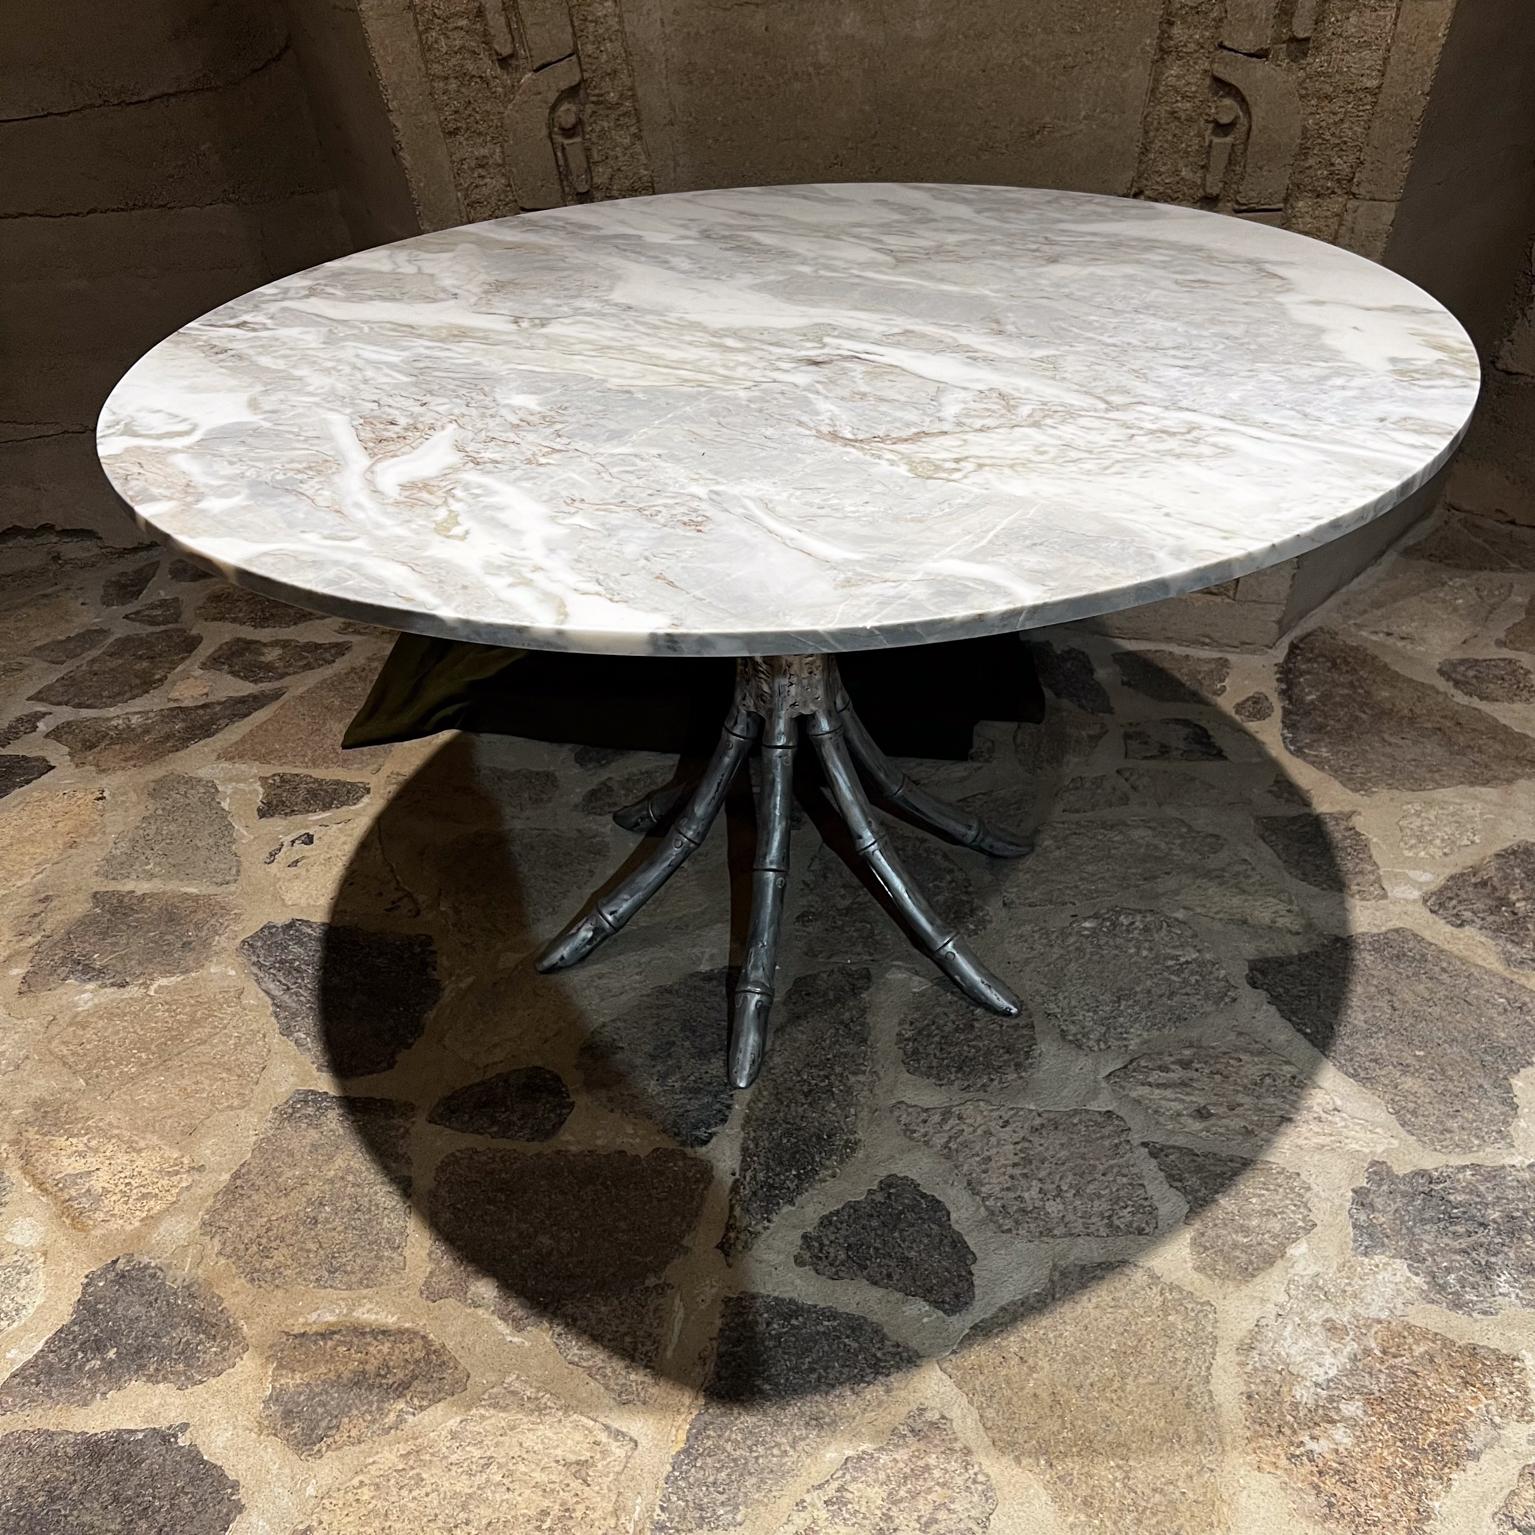 Hollywood Regency Faux Bamboo Aluminum Pedestal Dining Table Marble Top
Made in Mexico late 1950s.
No stamp
29.5 H x 48 in diameter, base 25.5 in diameter
New marble top. Raw aluminum, scuffs present.
Expect signs of vintage wear.
Refer to images.